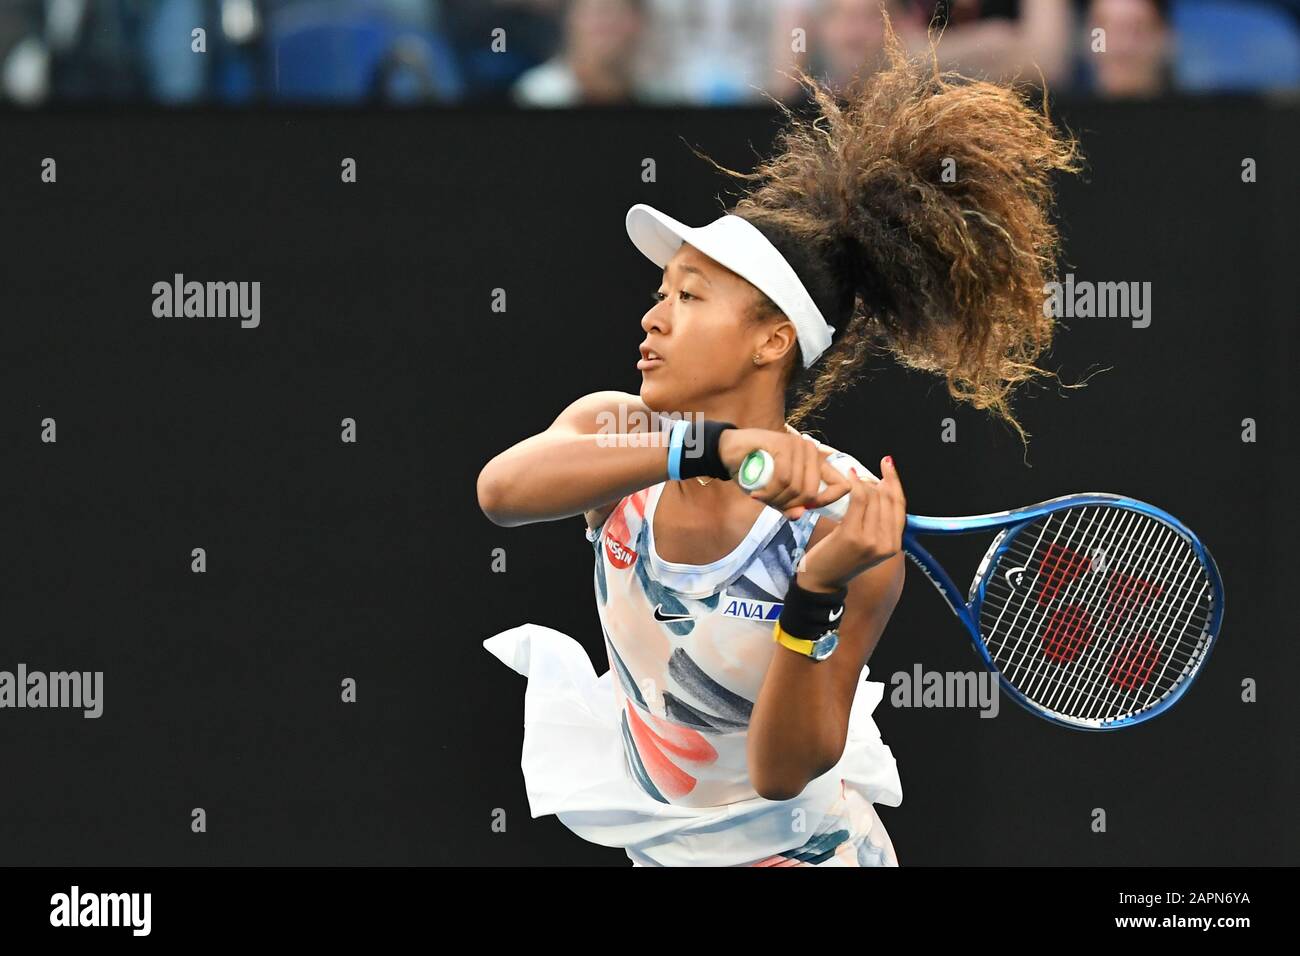 Melbourne, Australia. 24th Jan, 2020. 3rd seed NAOMI OSAKA (JPN) in action against COCO GAUFF (USA) on Rod Laver Arena in a Women's Singles 3rd round match on day 5 of the Australian Open 2020 in Melbourne, Australia. Sydney Low/Cal Sport Media. GAUFF won 63 64. Credit: csm/Alamy Live News Stock Photo